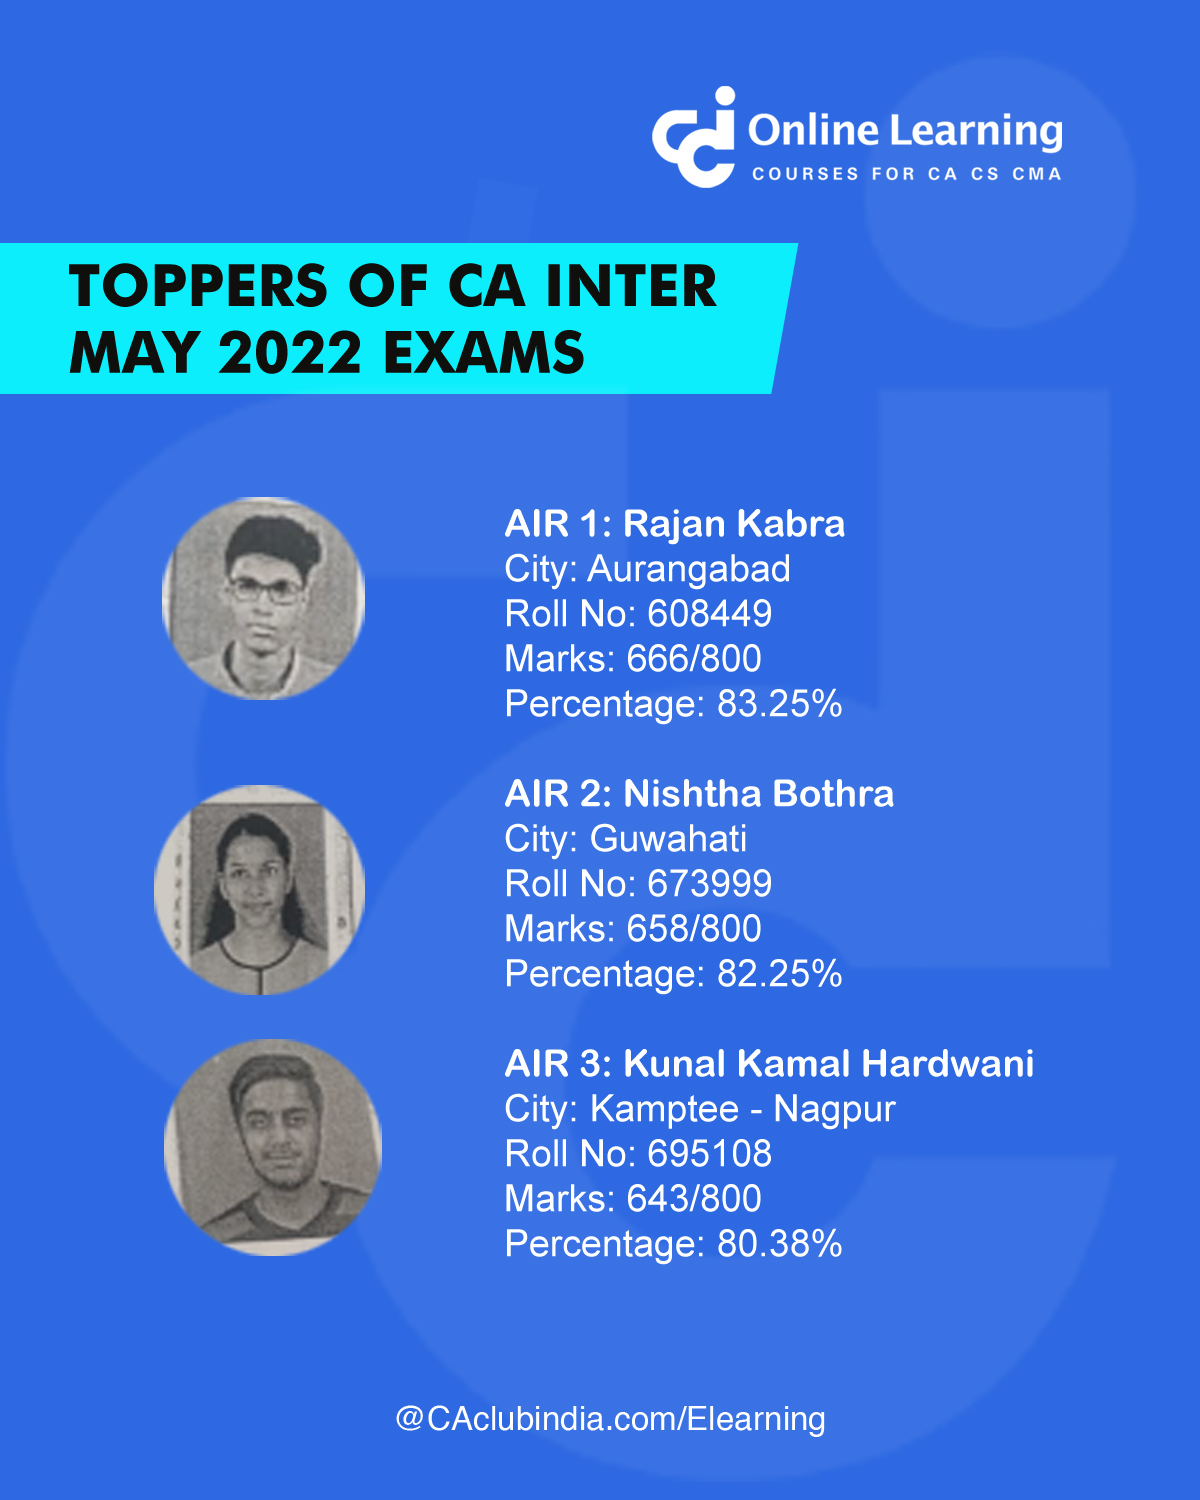 Toppers of CA Intermediate Examination held in May 2022